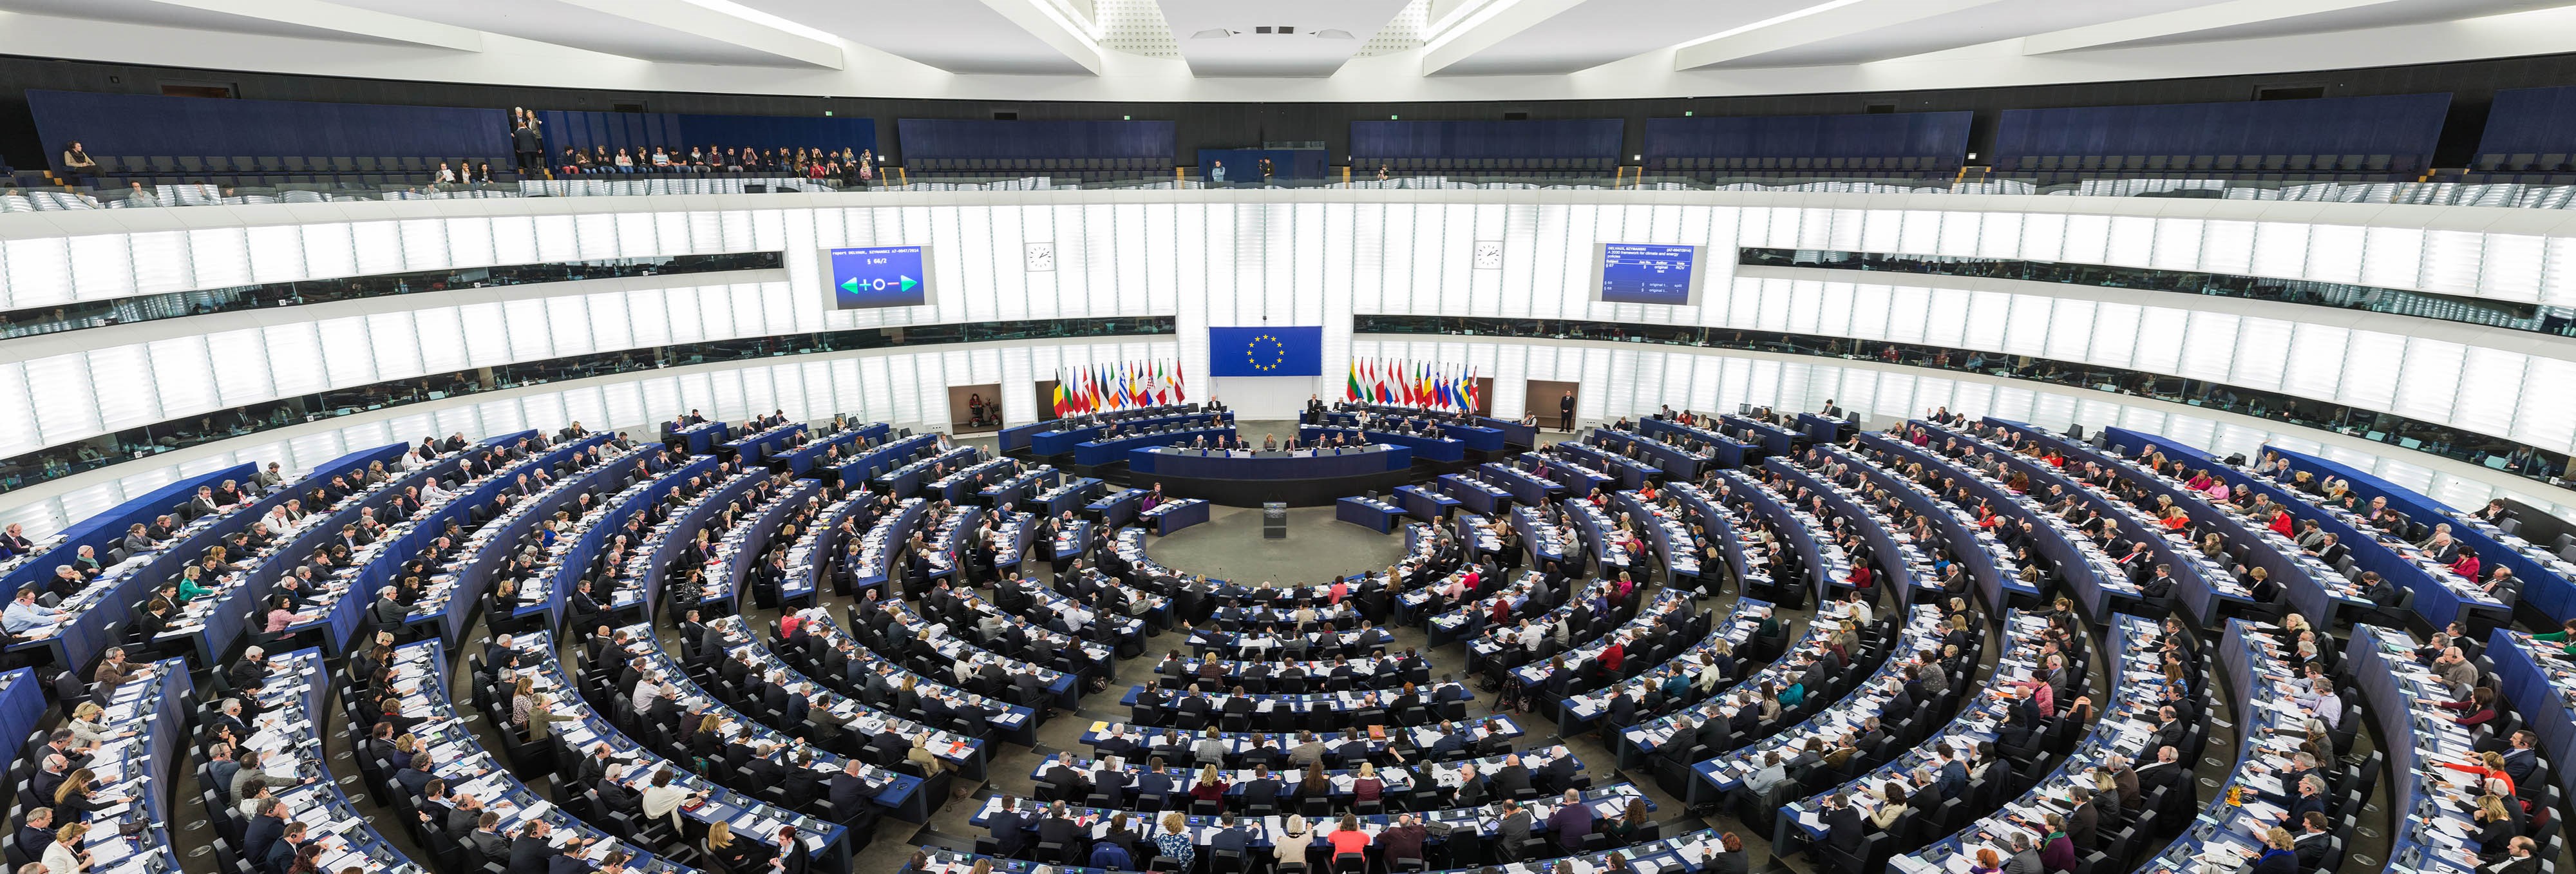 The European parliament. By Diliff - Own work, CC BY-SA 3.0, https://commons.wikimedia.org/w/index.php?curid=35972521